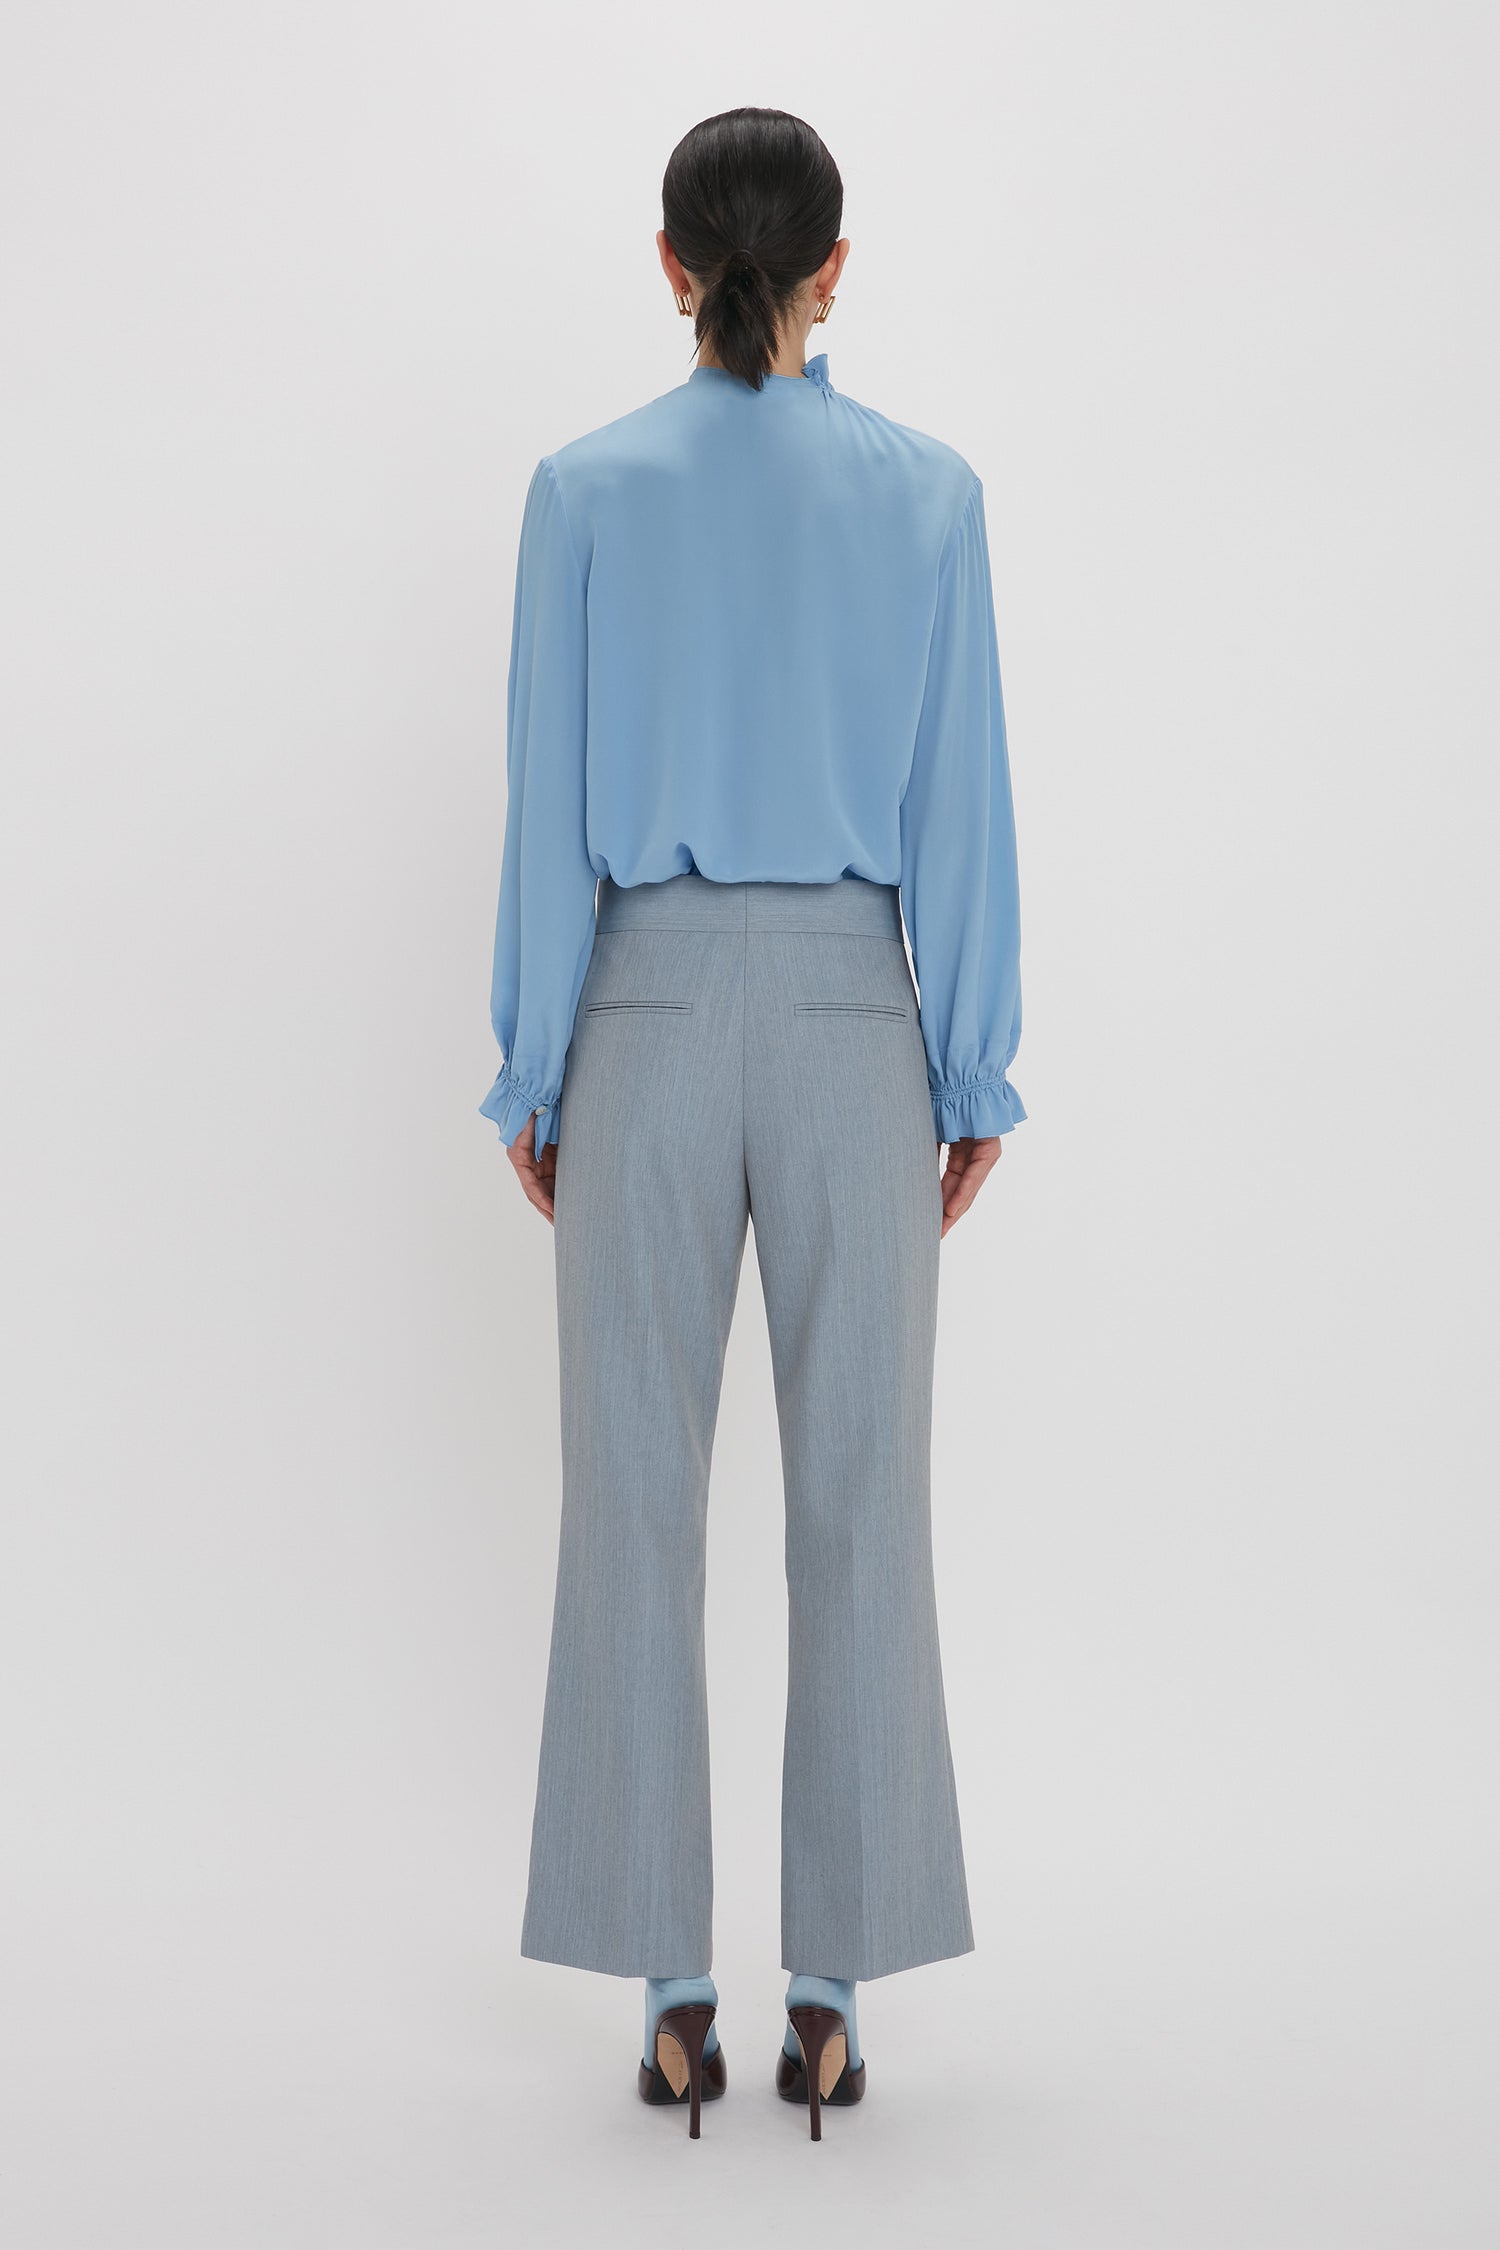 A person is standing with their back to the camera, wearing an Exclusive Ruffle Neck Blouse In Cornflower Blue from Victoria Beckham and gray pants. Their hair is tied back, and they are wearing high-heeled shoes.